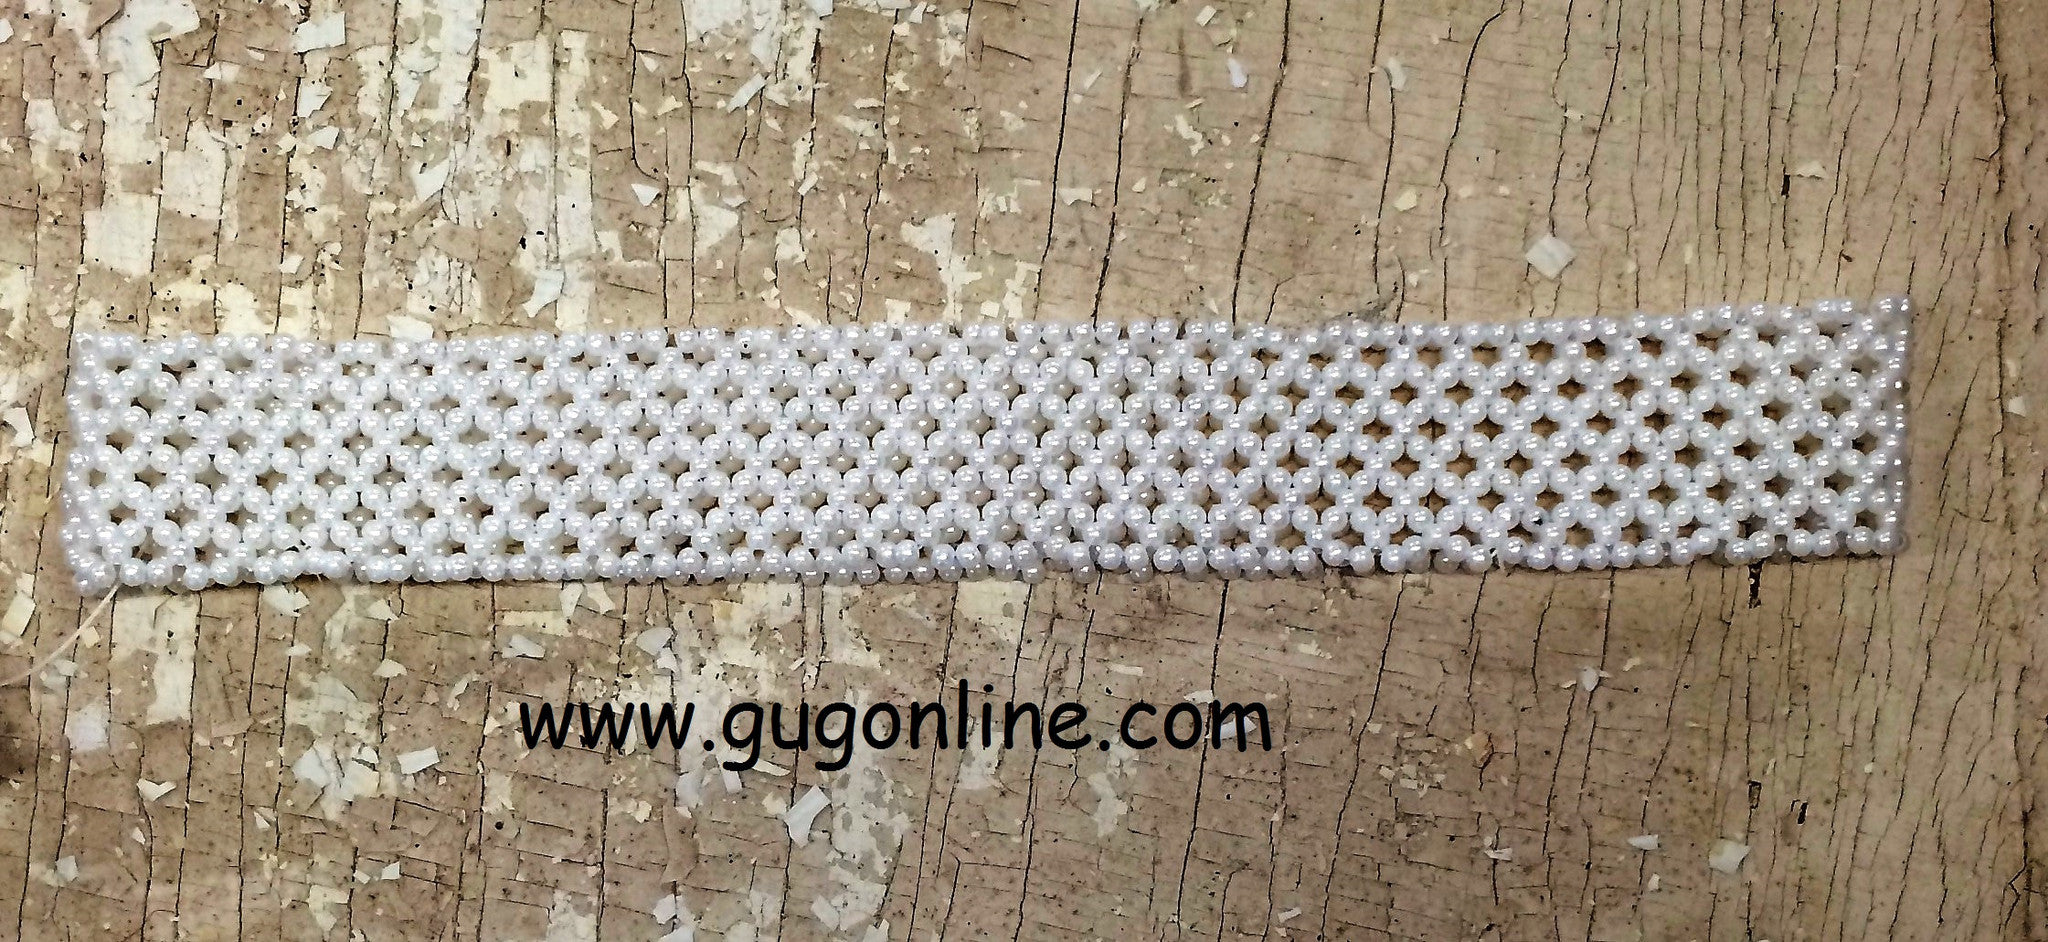 Beaded Headband in Pearl - Giddy Up Glamour Boutique